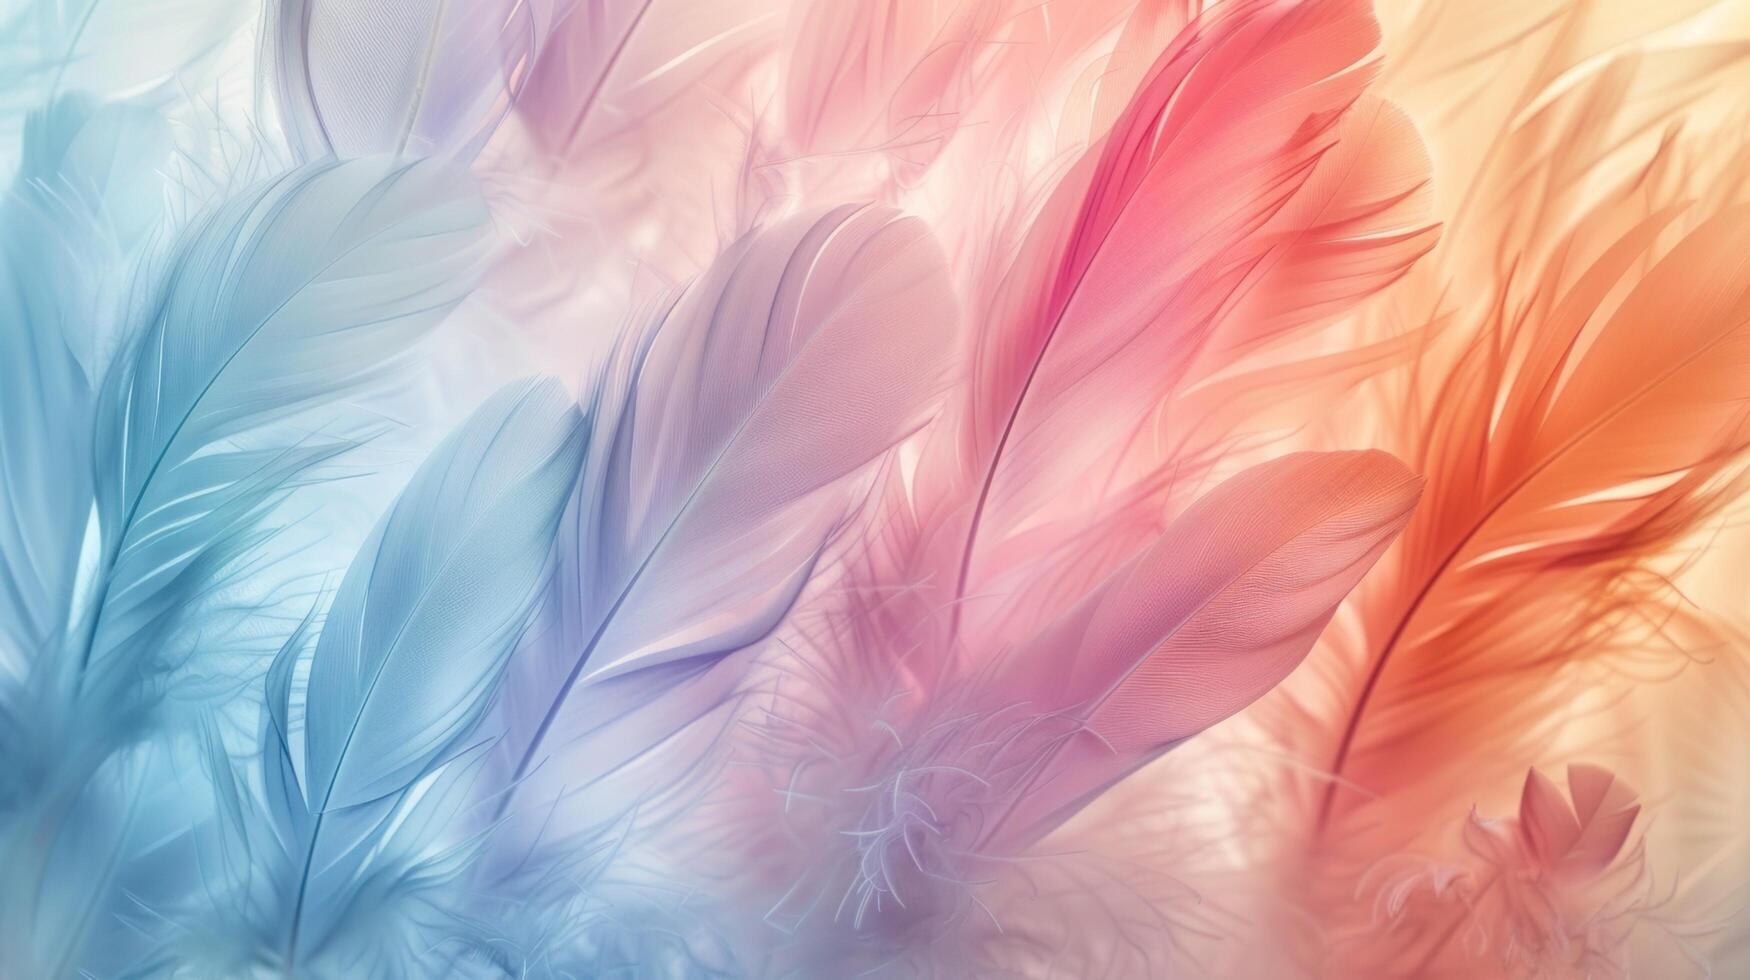 Pastel Color Soft Feather Abstract Background, Dreamy Palette of Serene Hues for Sophisticated Designs photo